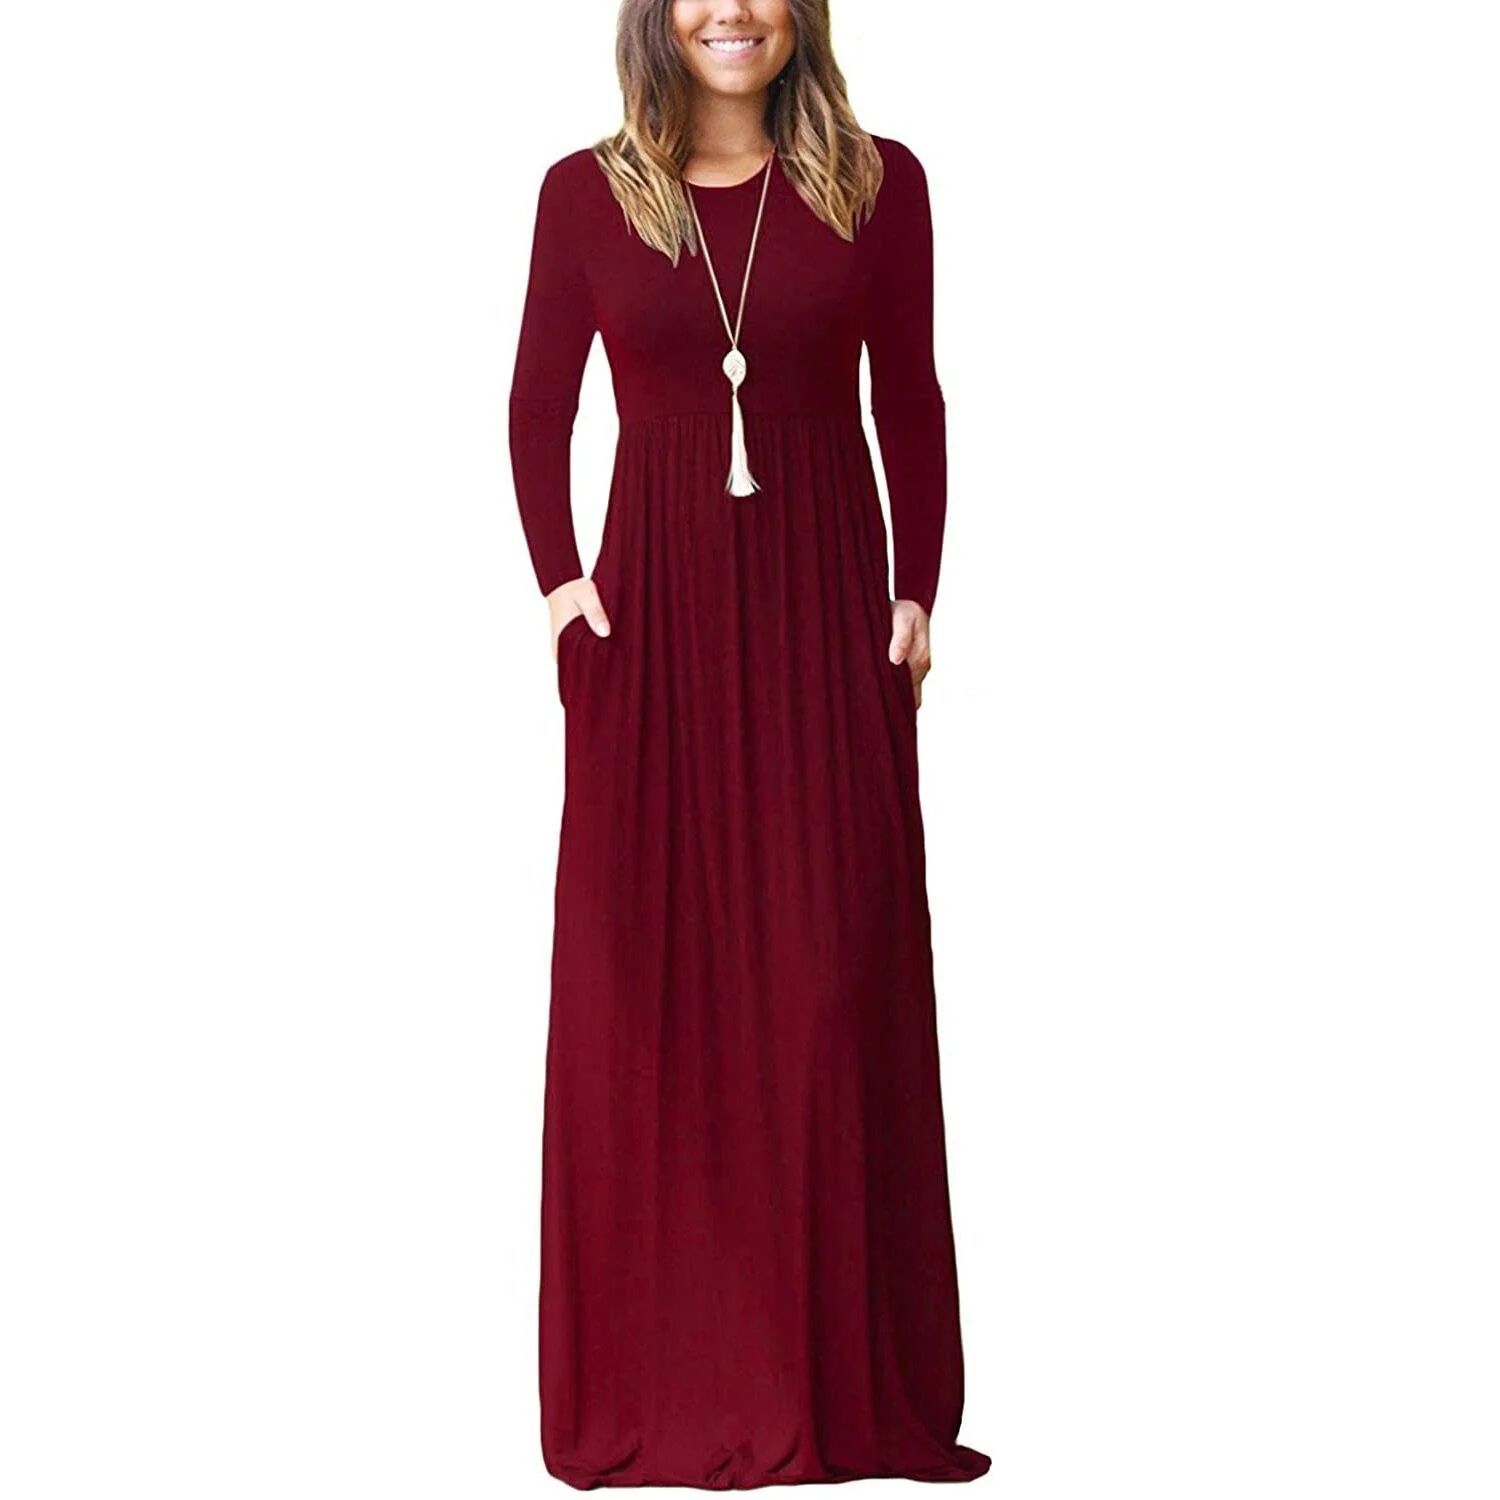 DailySale Women Long Sleeve Loose Plain Maxi Dresses Casual Long Dresses with Pockets